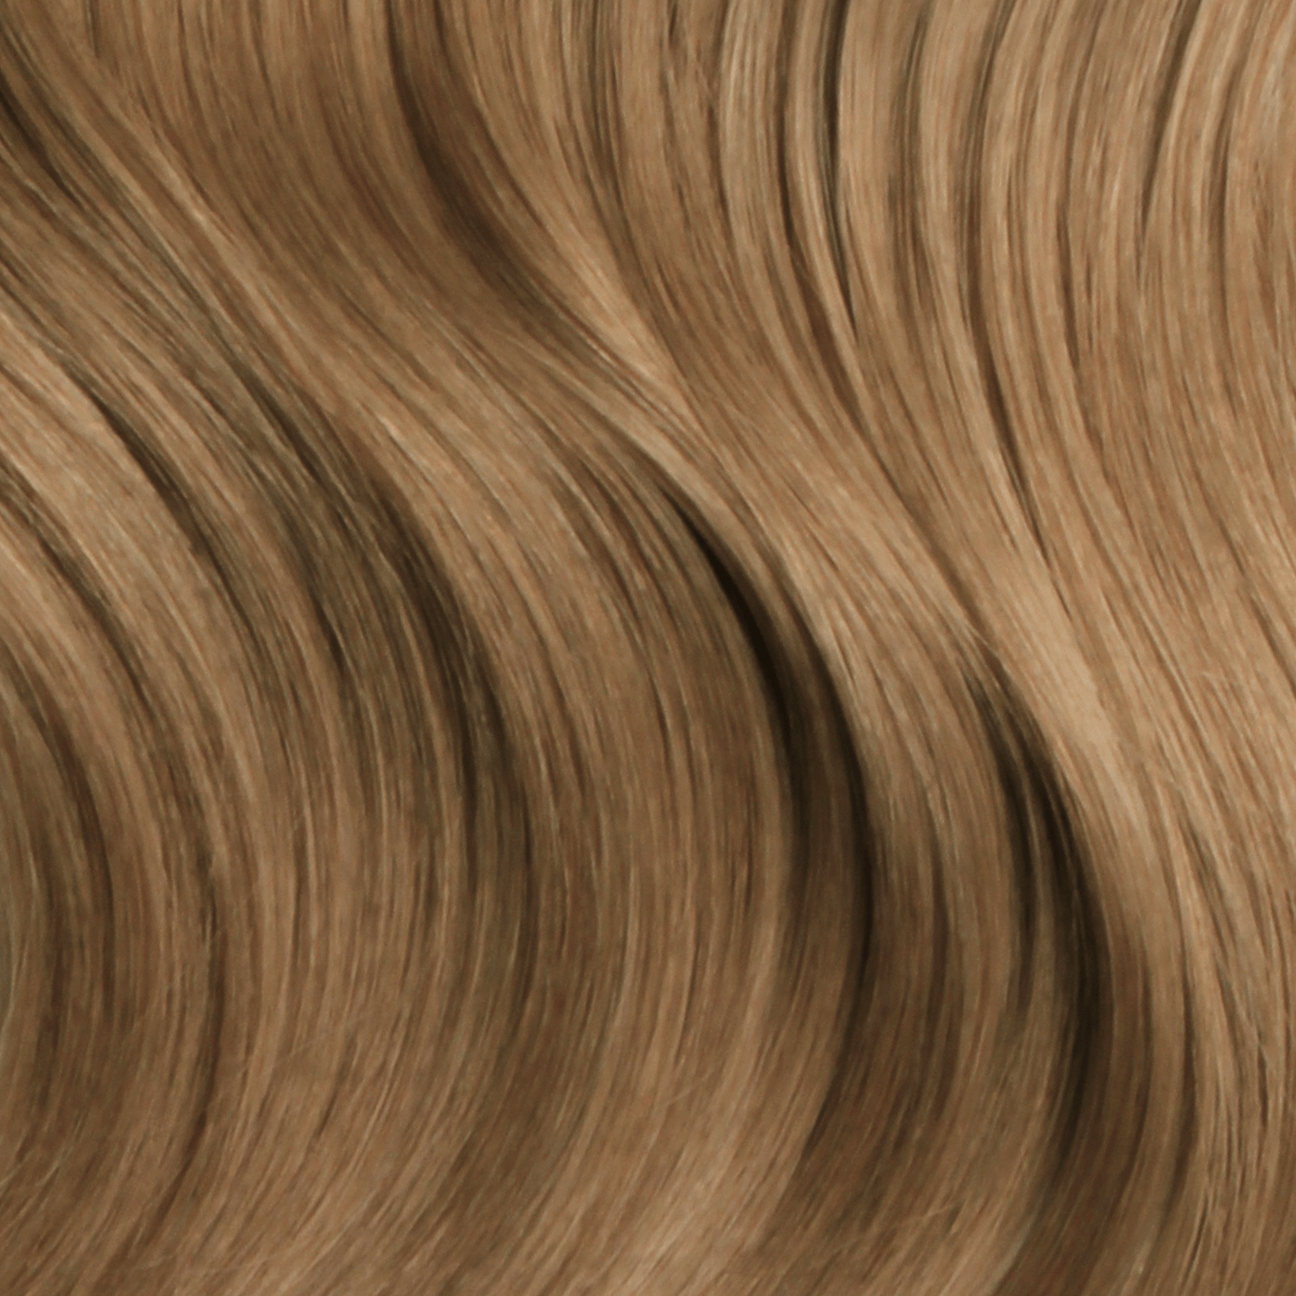 Nano Bonds 18 Inches - SWAY Hair Extensions Sunkissed-Brown-8-10 Ultra-fine, invisible bonds for a flawless, natural look. 100% Remy Human hair, lightweight and versatile. Reusable and perfect for individual or salon use.